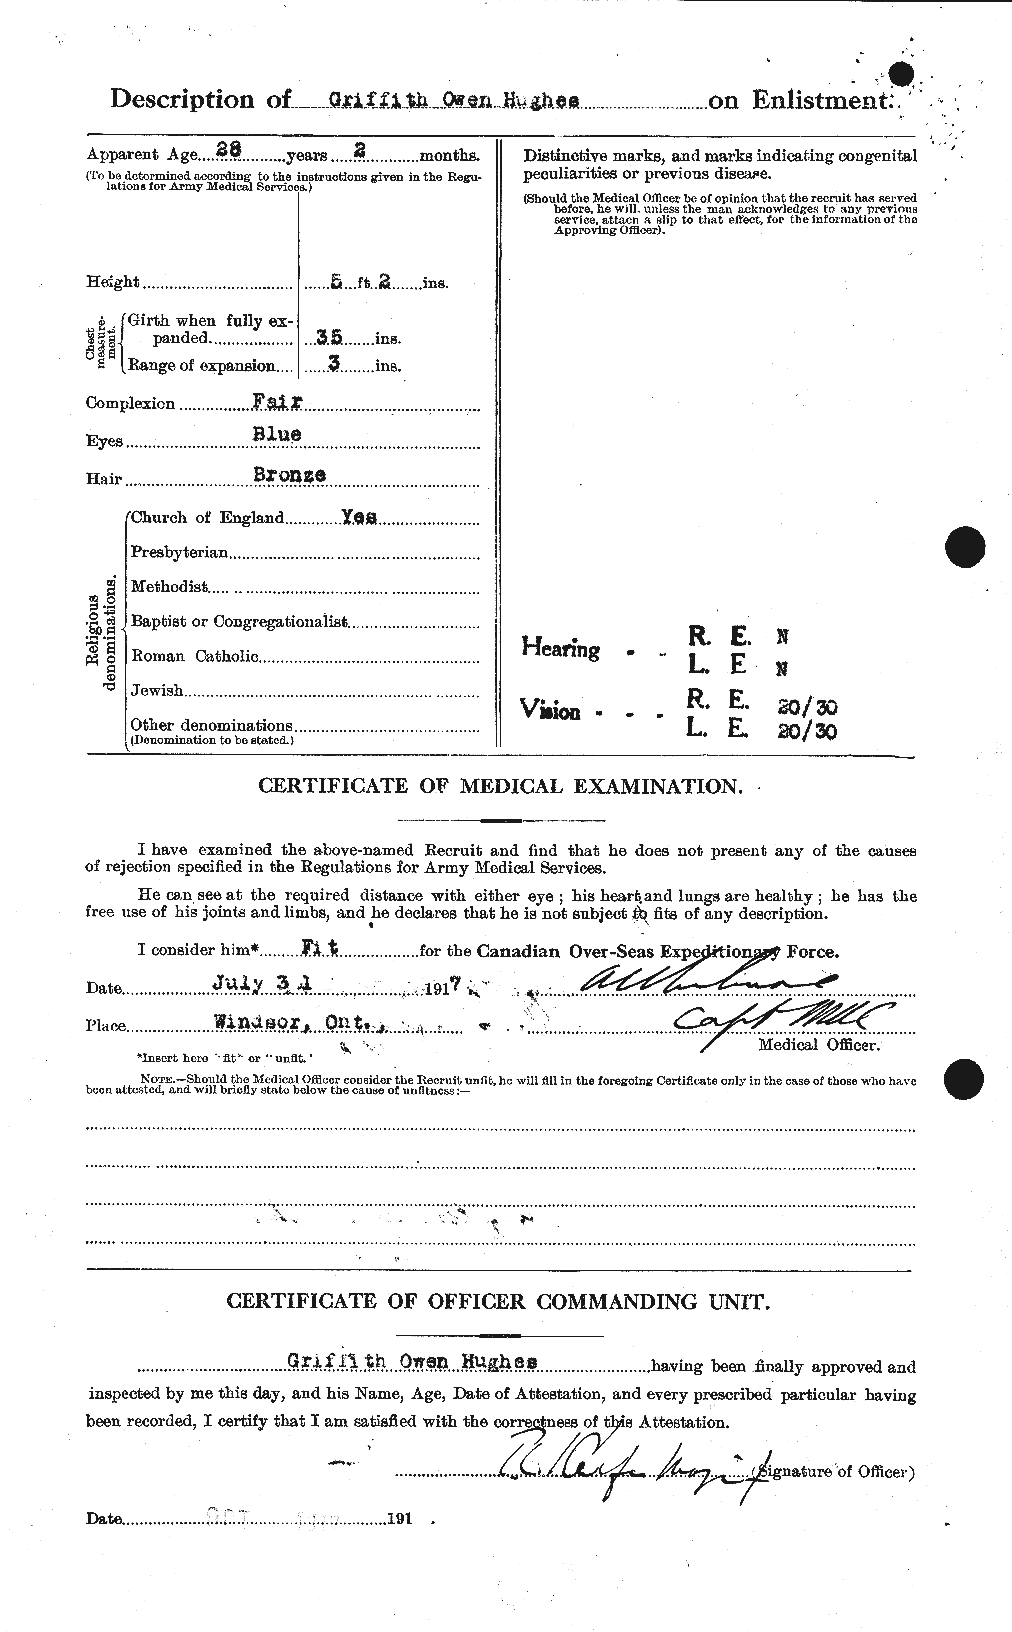 Personnel Records of the First World War - CEF 403853b